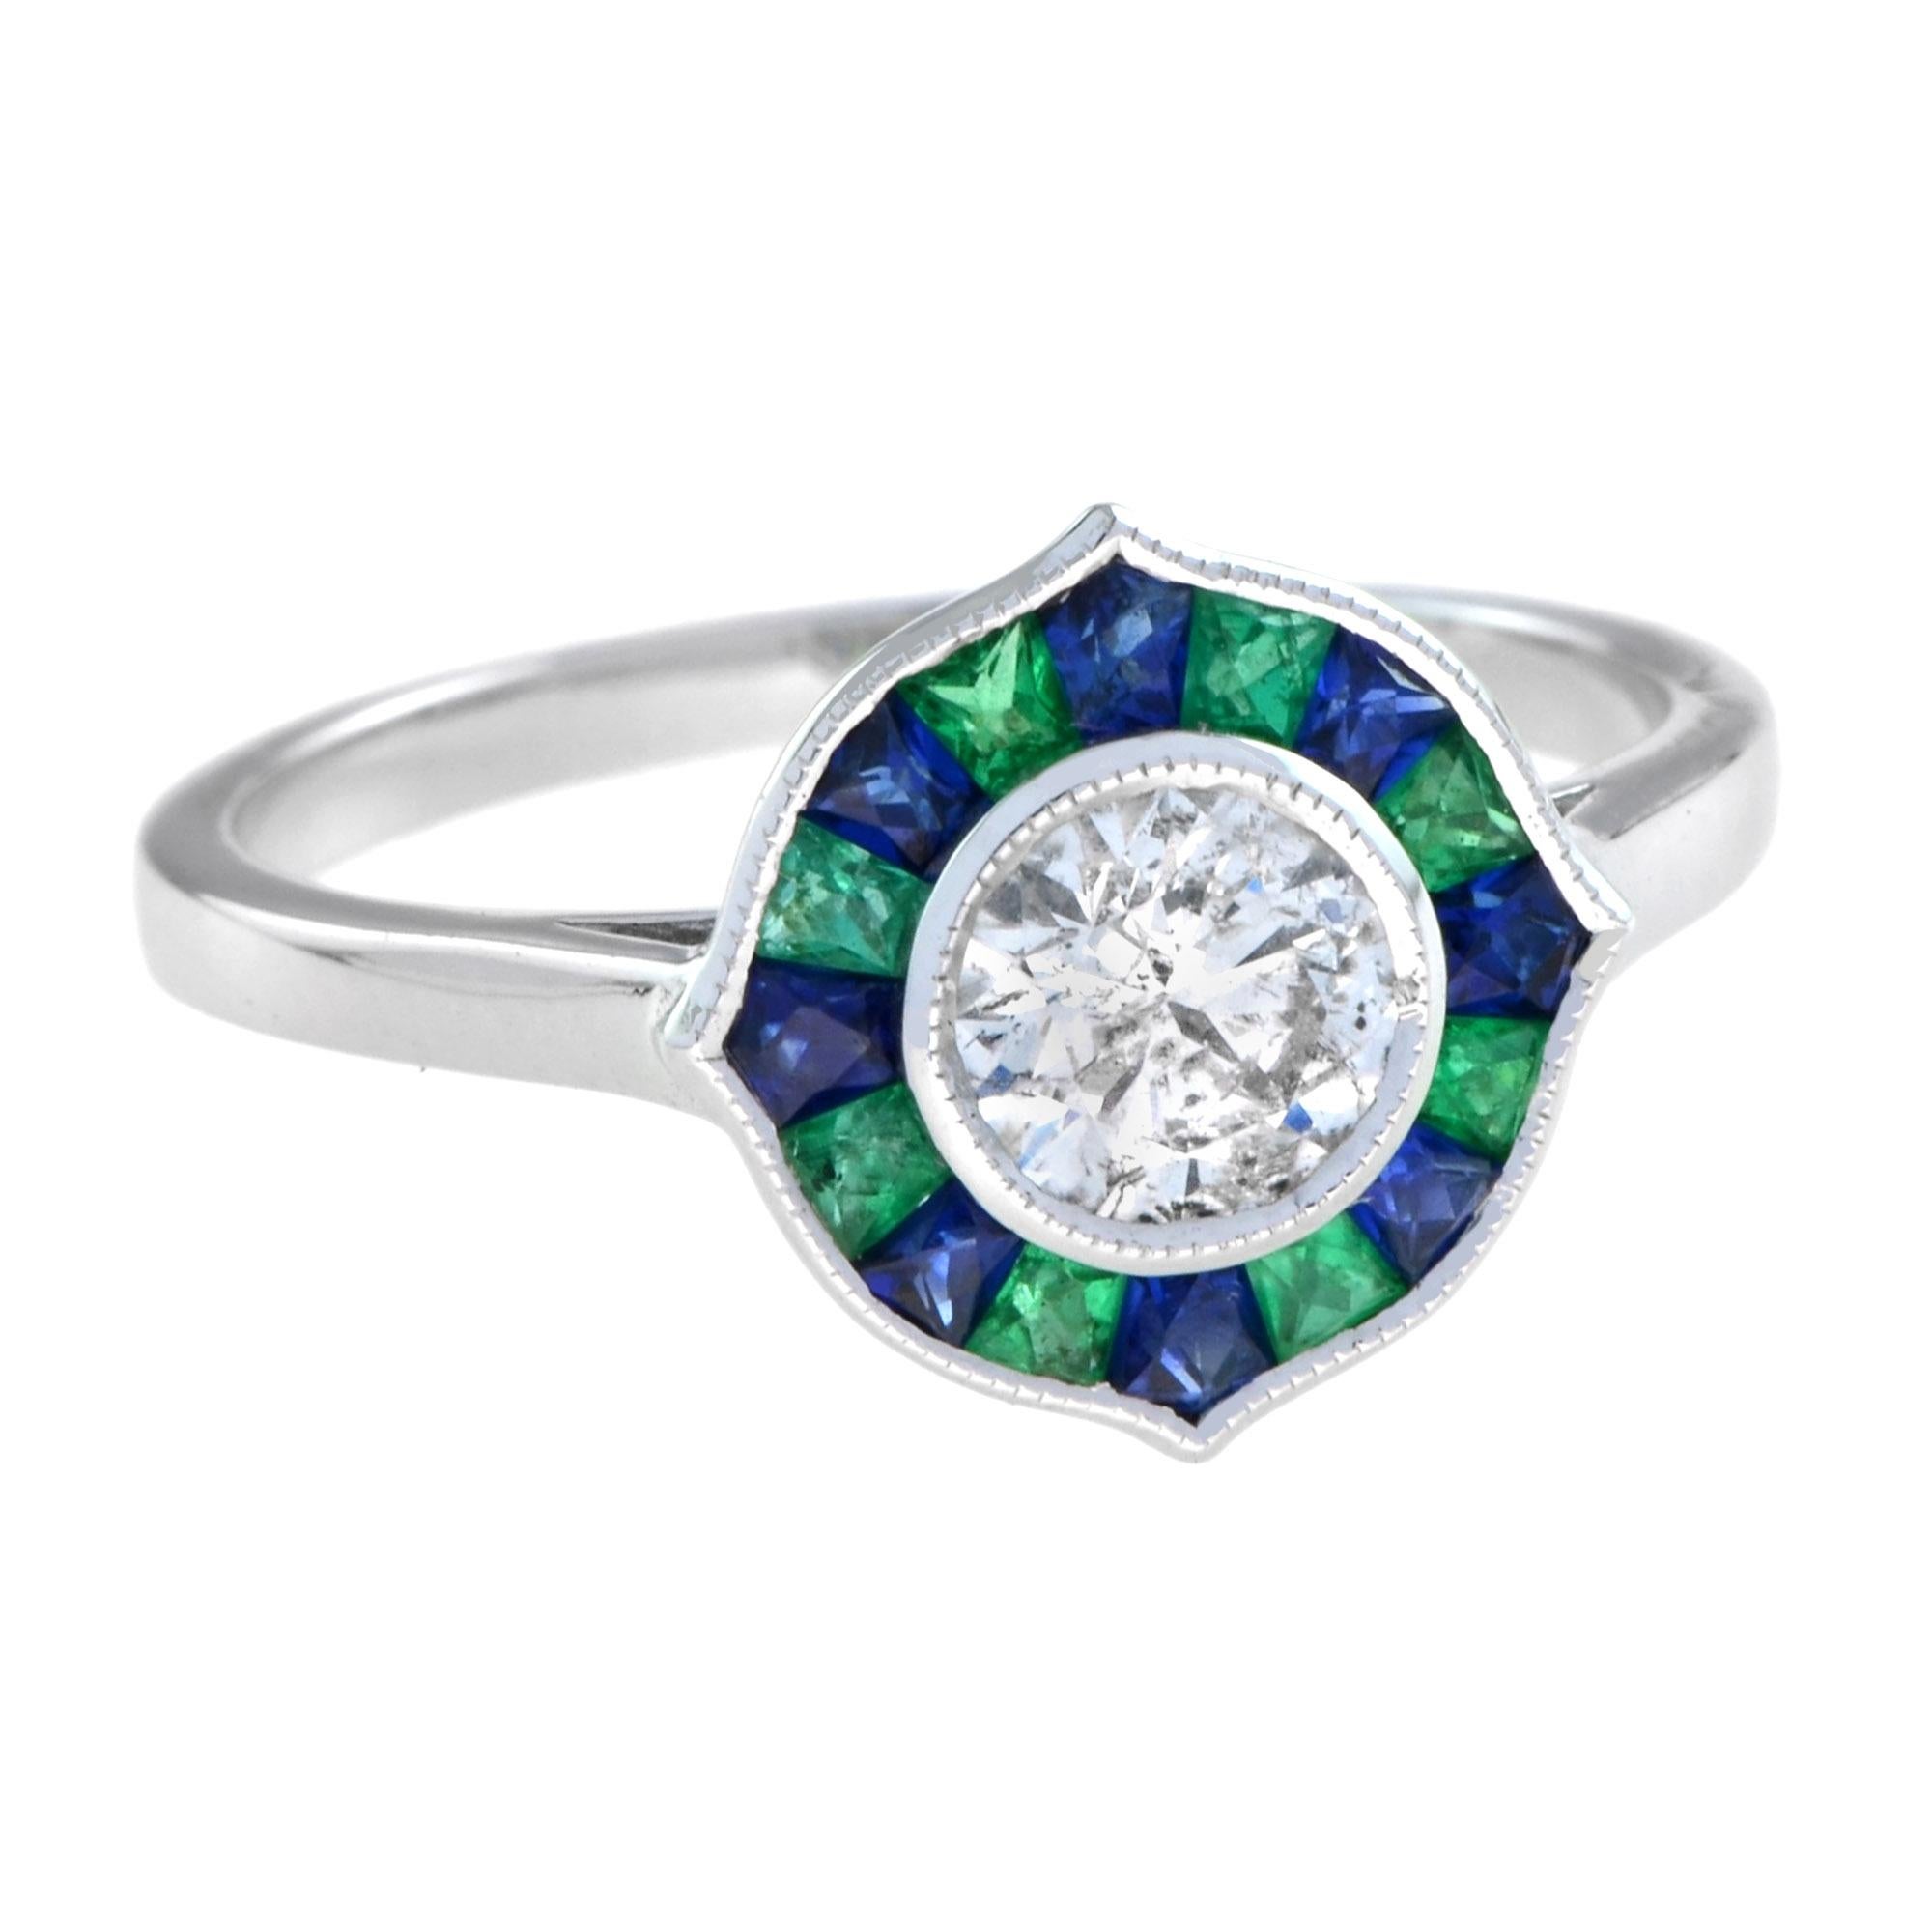 This stunning halo ring sparkles in lustrous 14k white gold and features a 0.52 carat round diamond at the center with French cut emerald and sapphire in beautiful halo designs. Adorn yourself with an Art Deco inspired jewelry in every occasion in